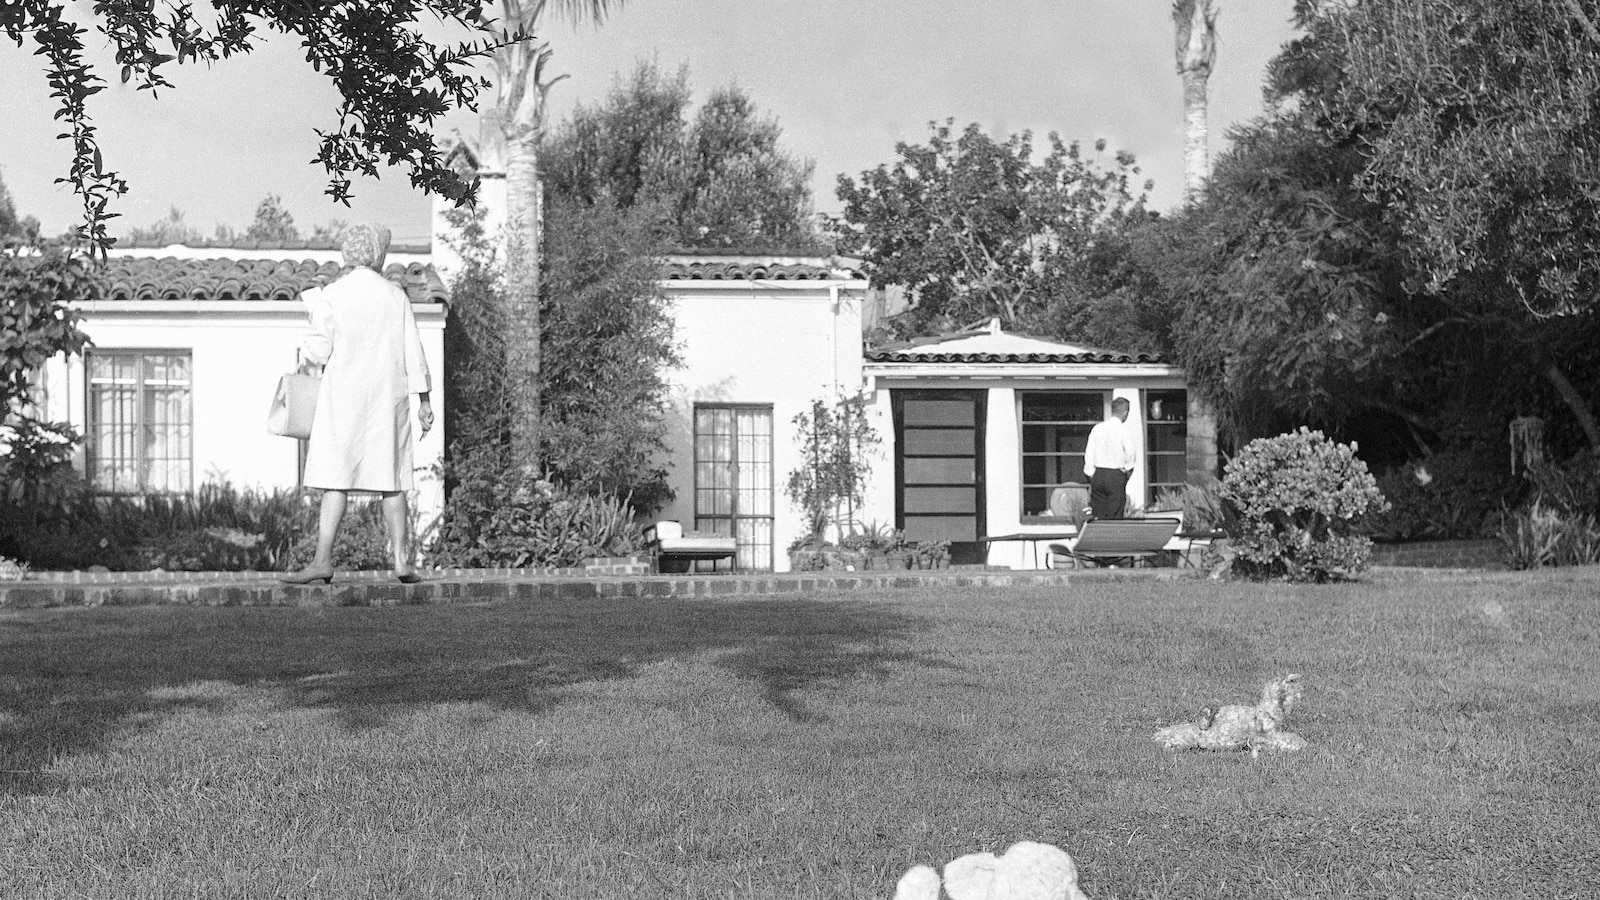 Marilyn Monroe's Former Los Angeles Residence Designated as Historic Monument to Prevent Demolition